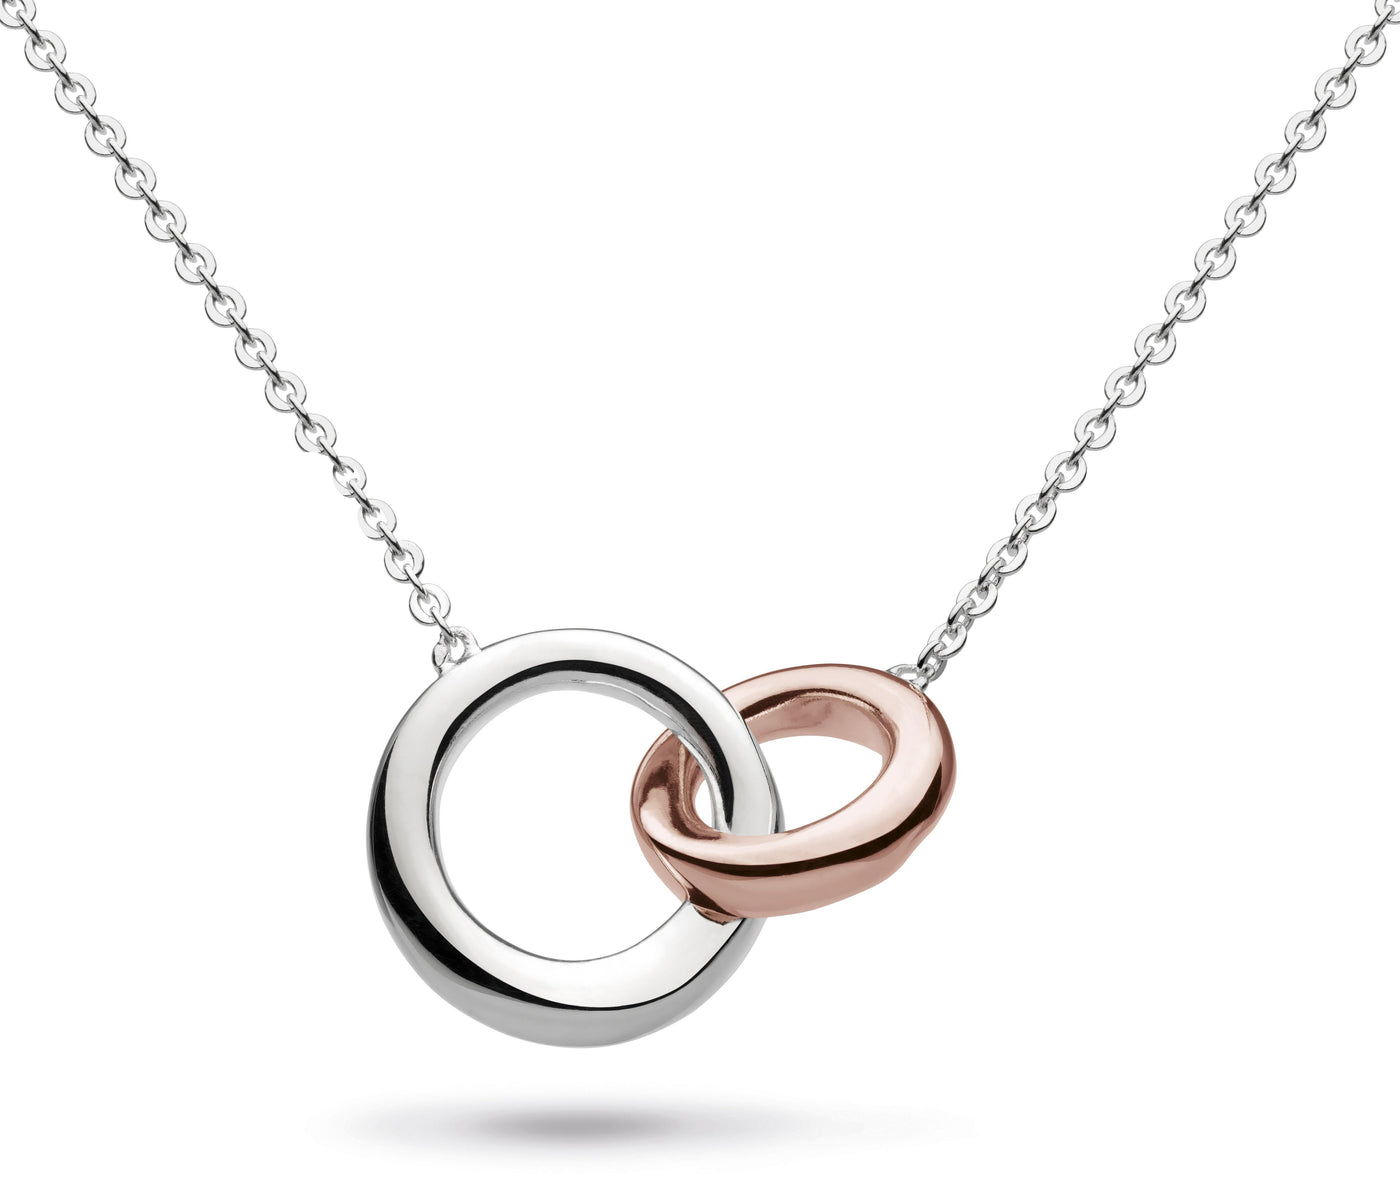 Kit Heath Bevel Cirque Link Necklace in Rose Gold - Rococo Jewellery